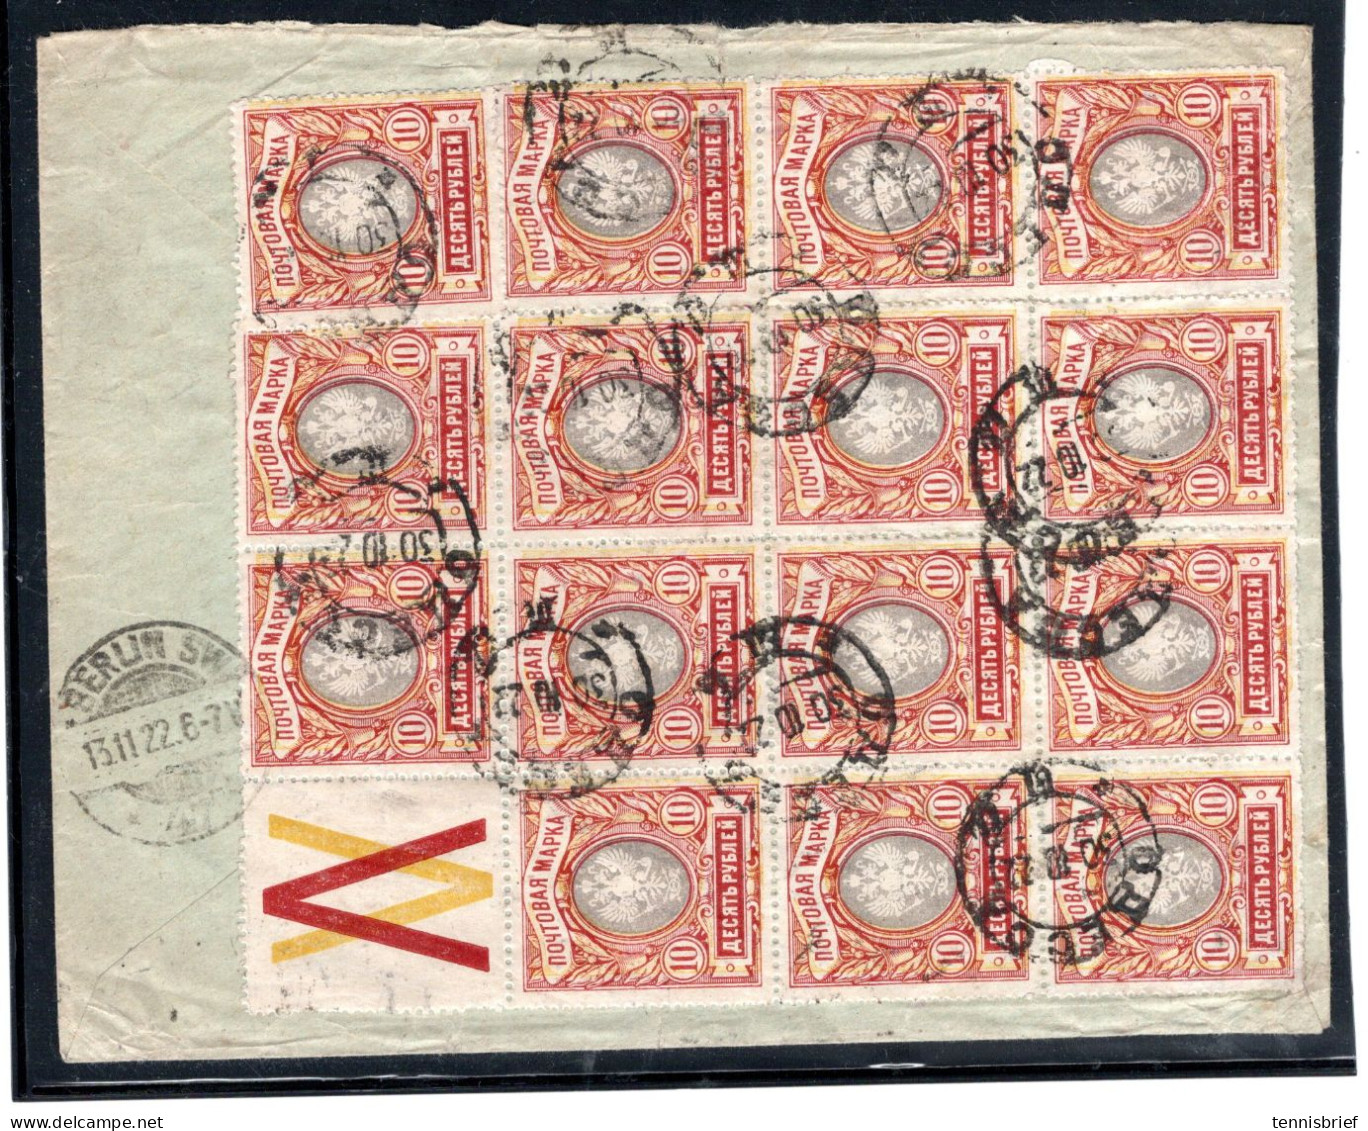 1922, 10 Rubel ,high Value, Bloc Of 14 , Included Empty Stamp With V , Rare Multiple Franking , Reg. Cover - Covers & Documents